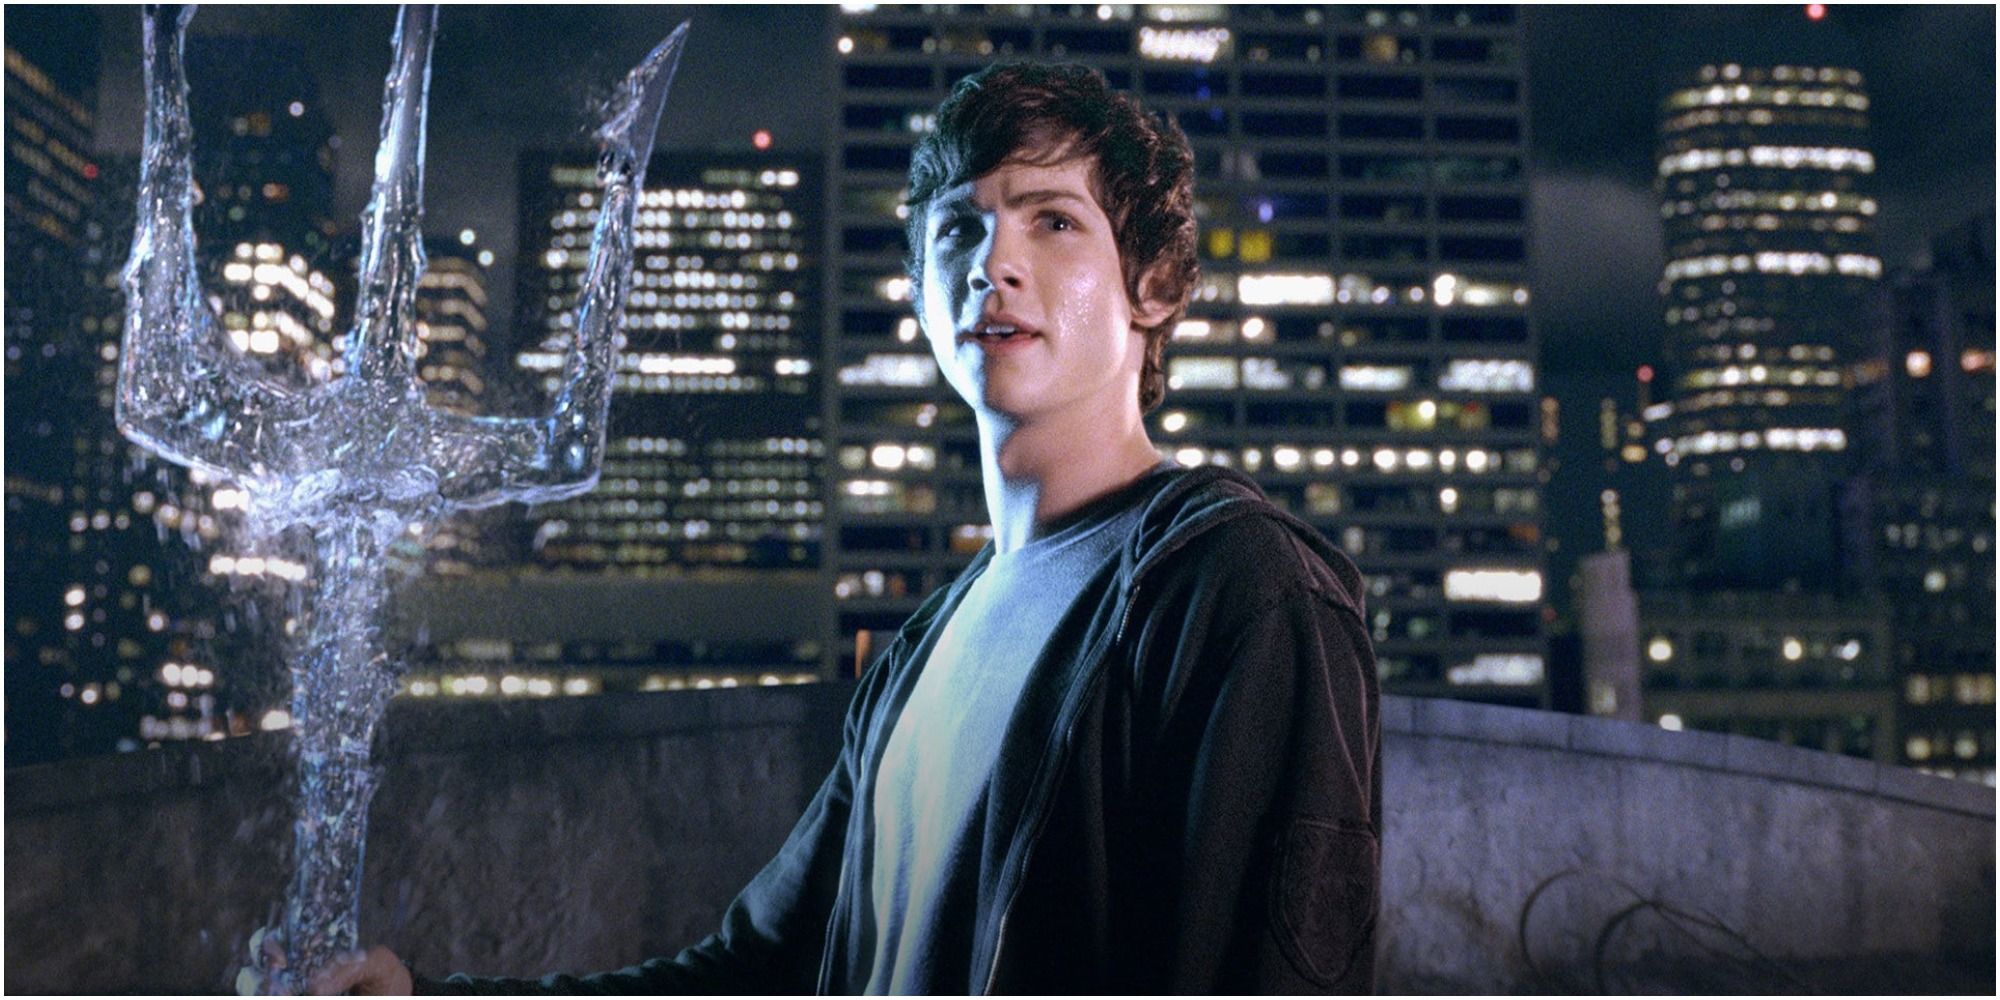 A teenager holding a trident in Percy Jackson & the Olympians